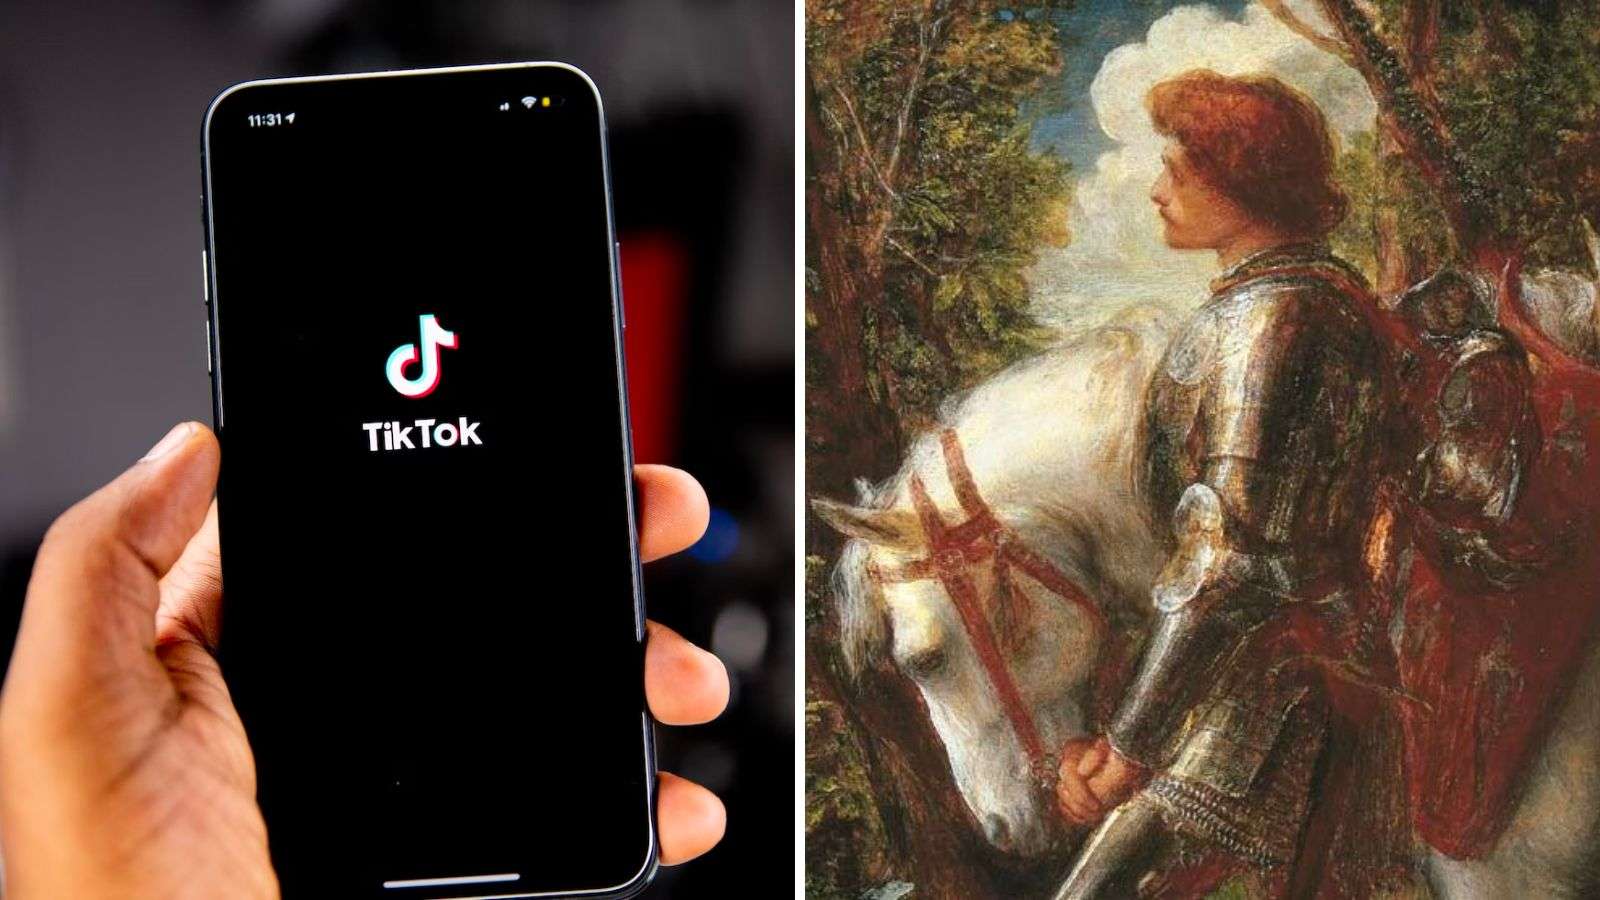 How to take the soldier, a poet, or a king quiz going viral on TikTok